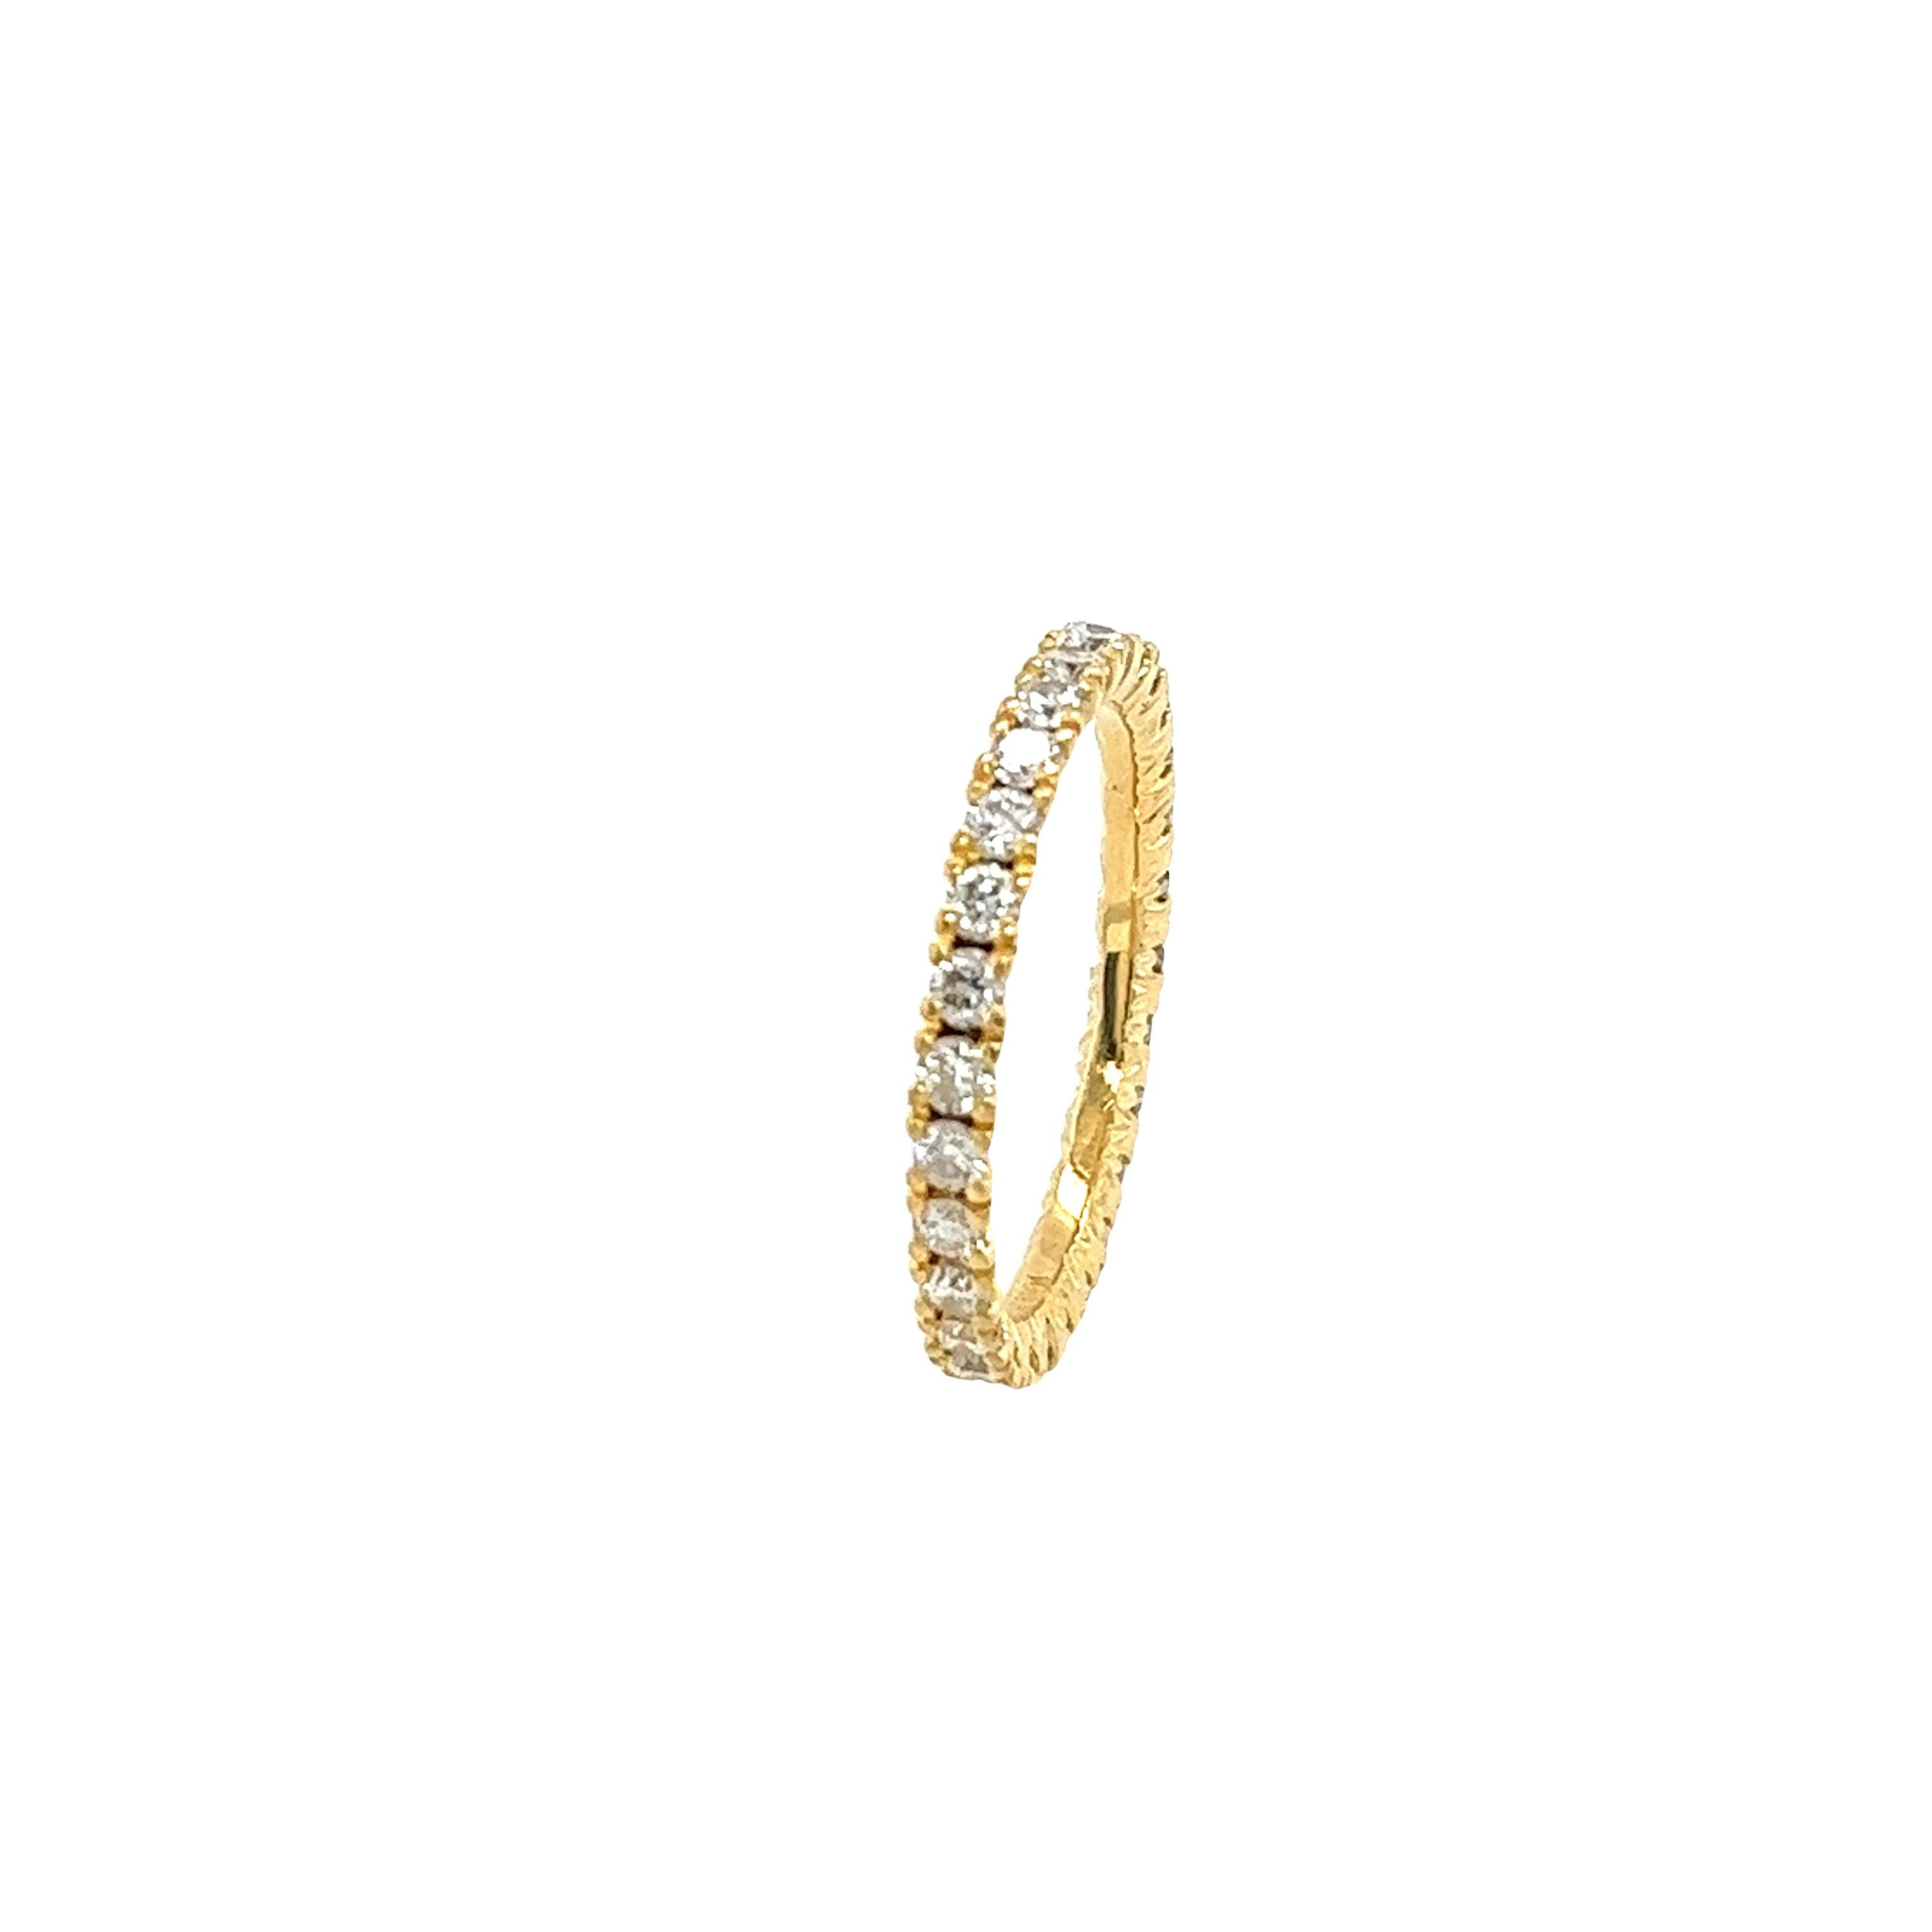 Browns 18ct Yellow Gold Diamond Full Eternity Ring Set With 0.90ct For Sale 2